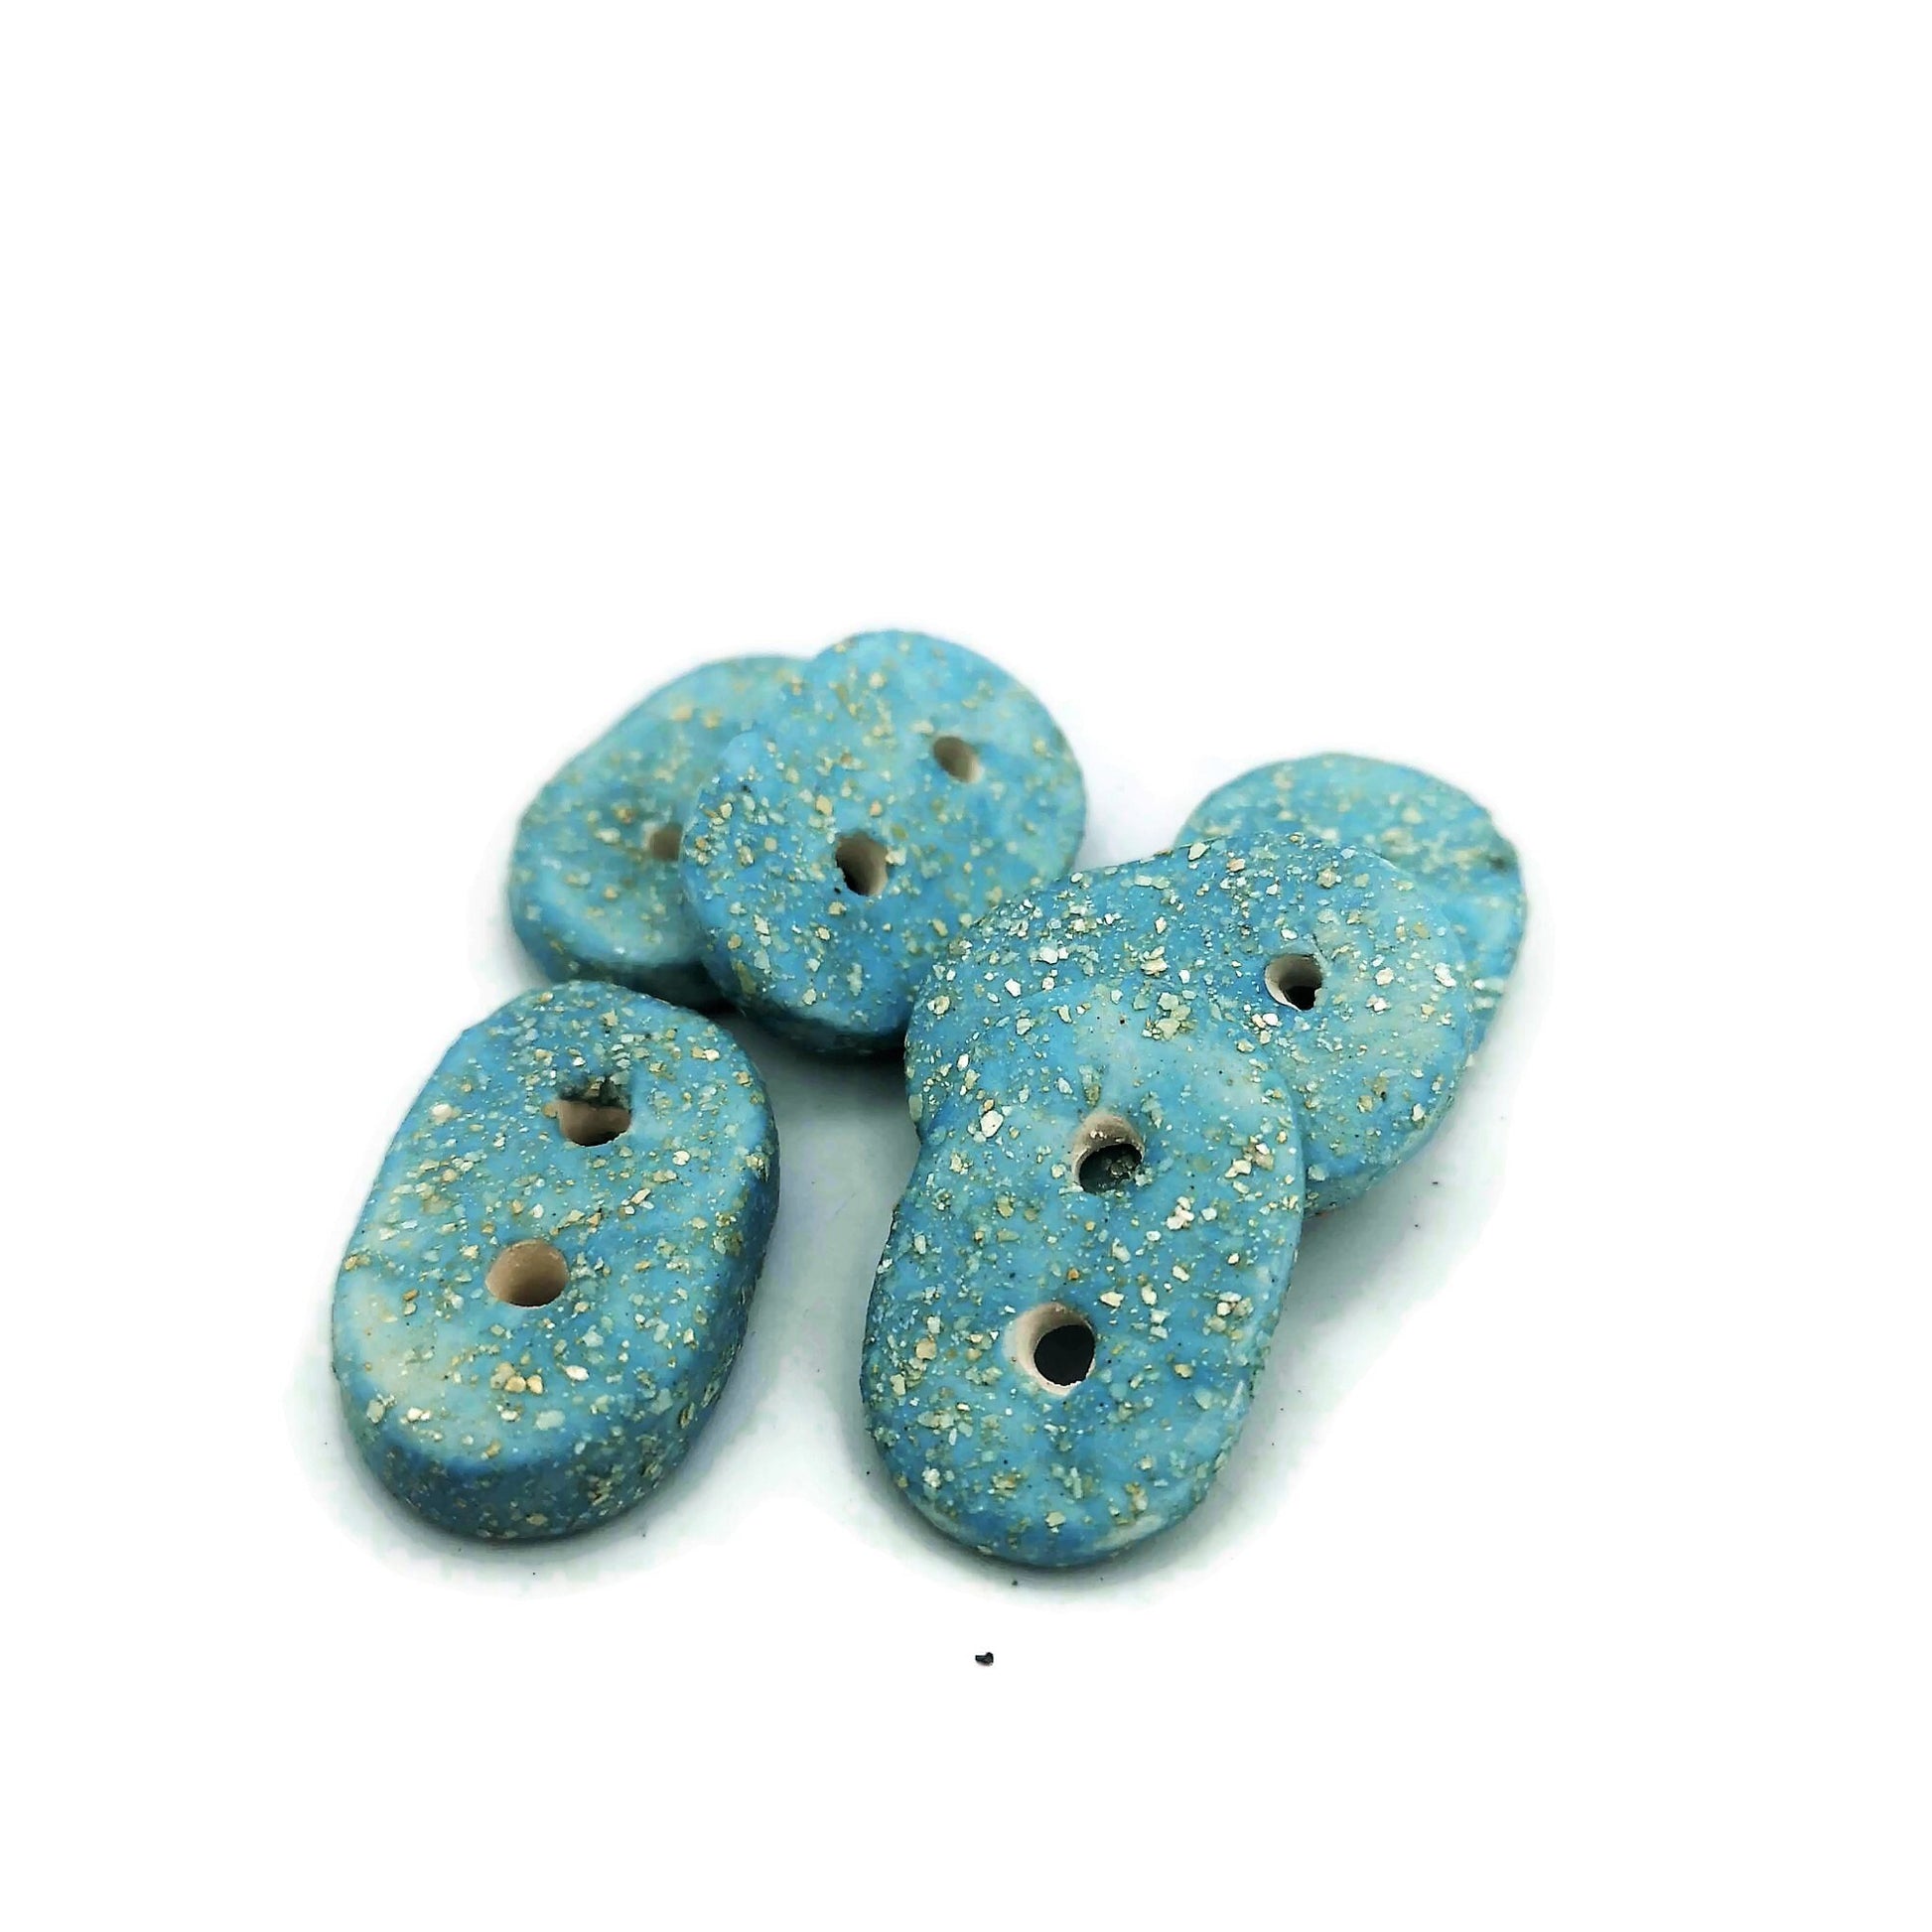 6Pc Handmade Ceramic Oval Sewing Button For Clothing, 3 cm 2 Hole Sparkly Turquoise Blue Decorative Knitting Button, Lightweight and Smooth - Ceramica Ana Rafael